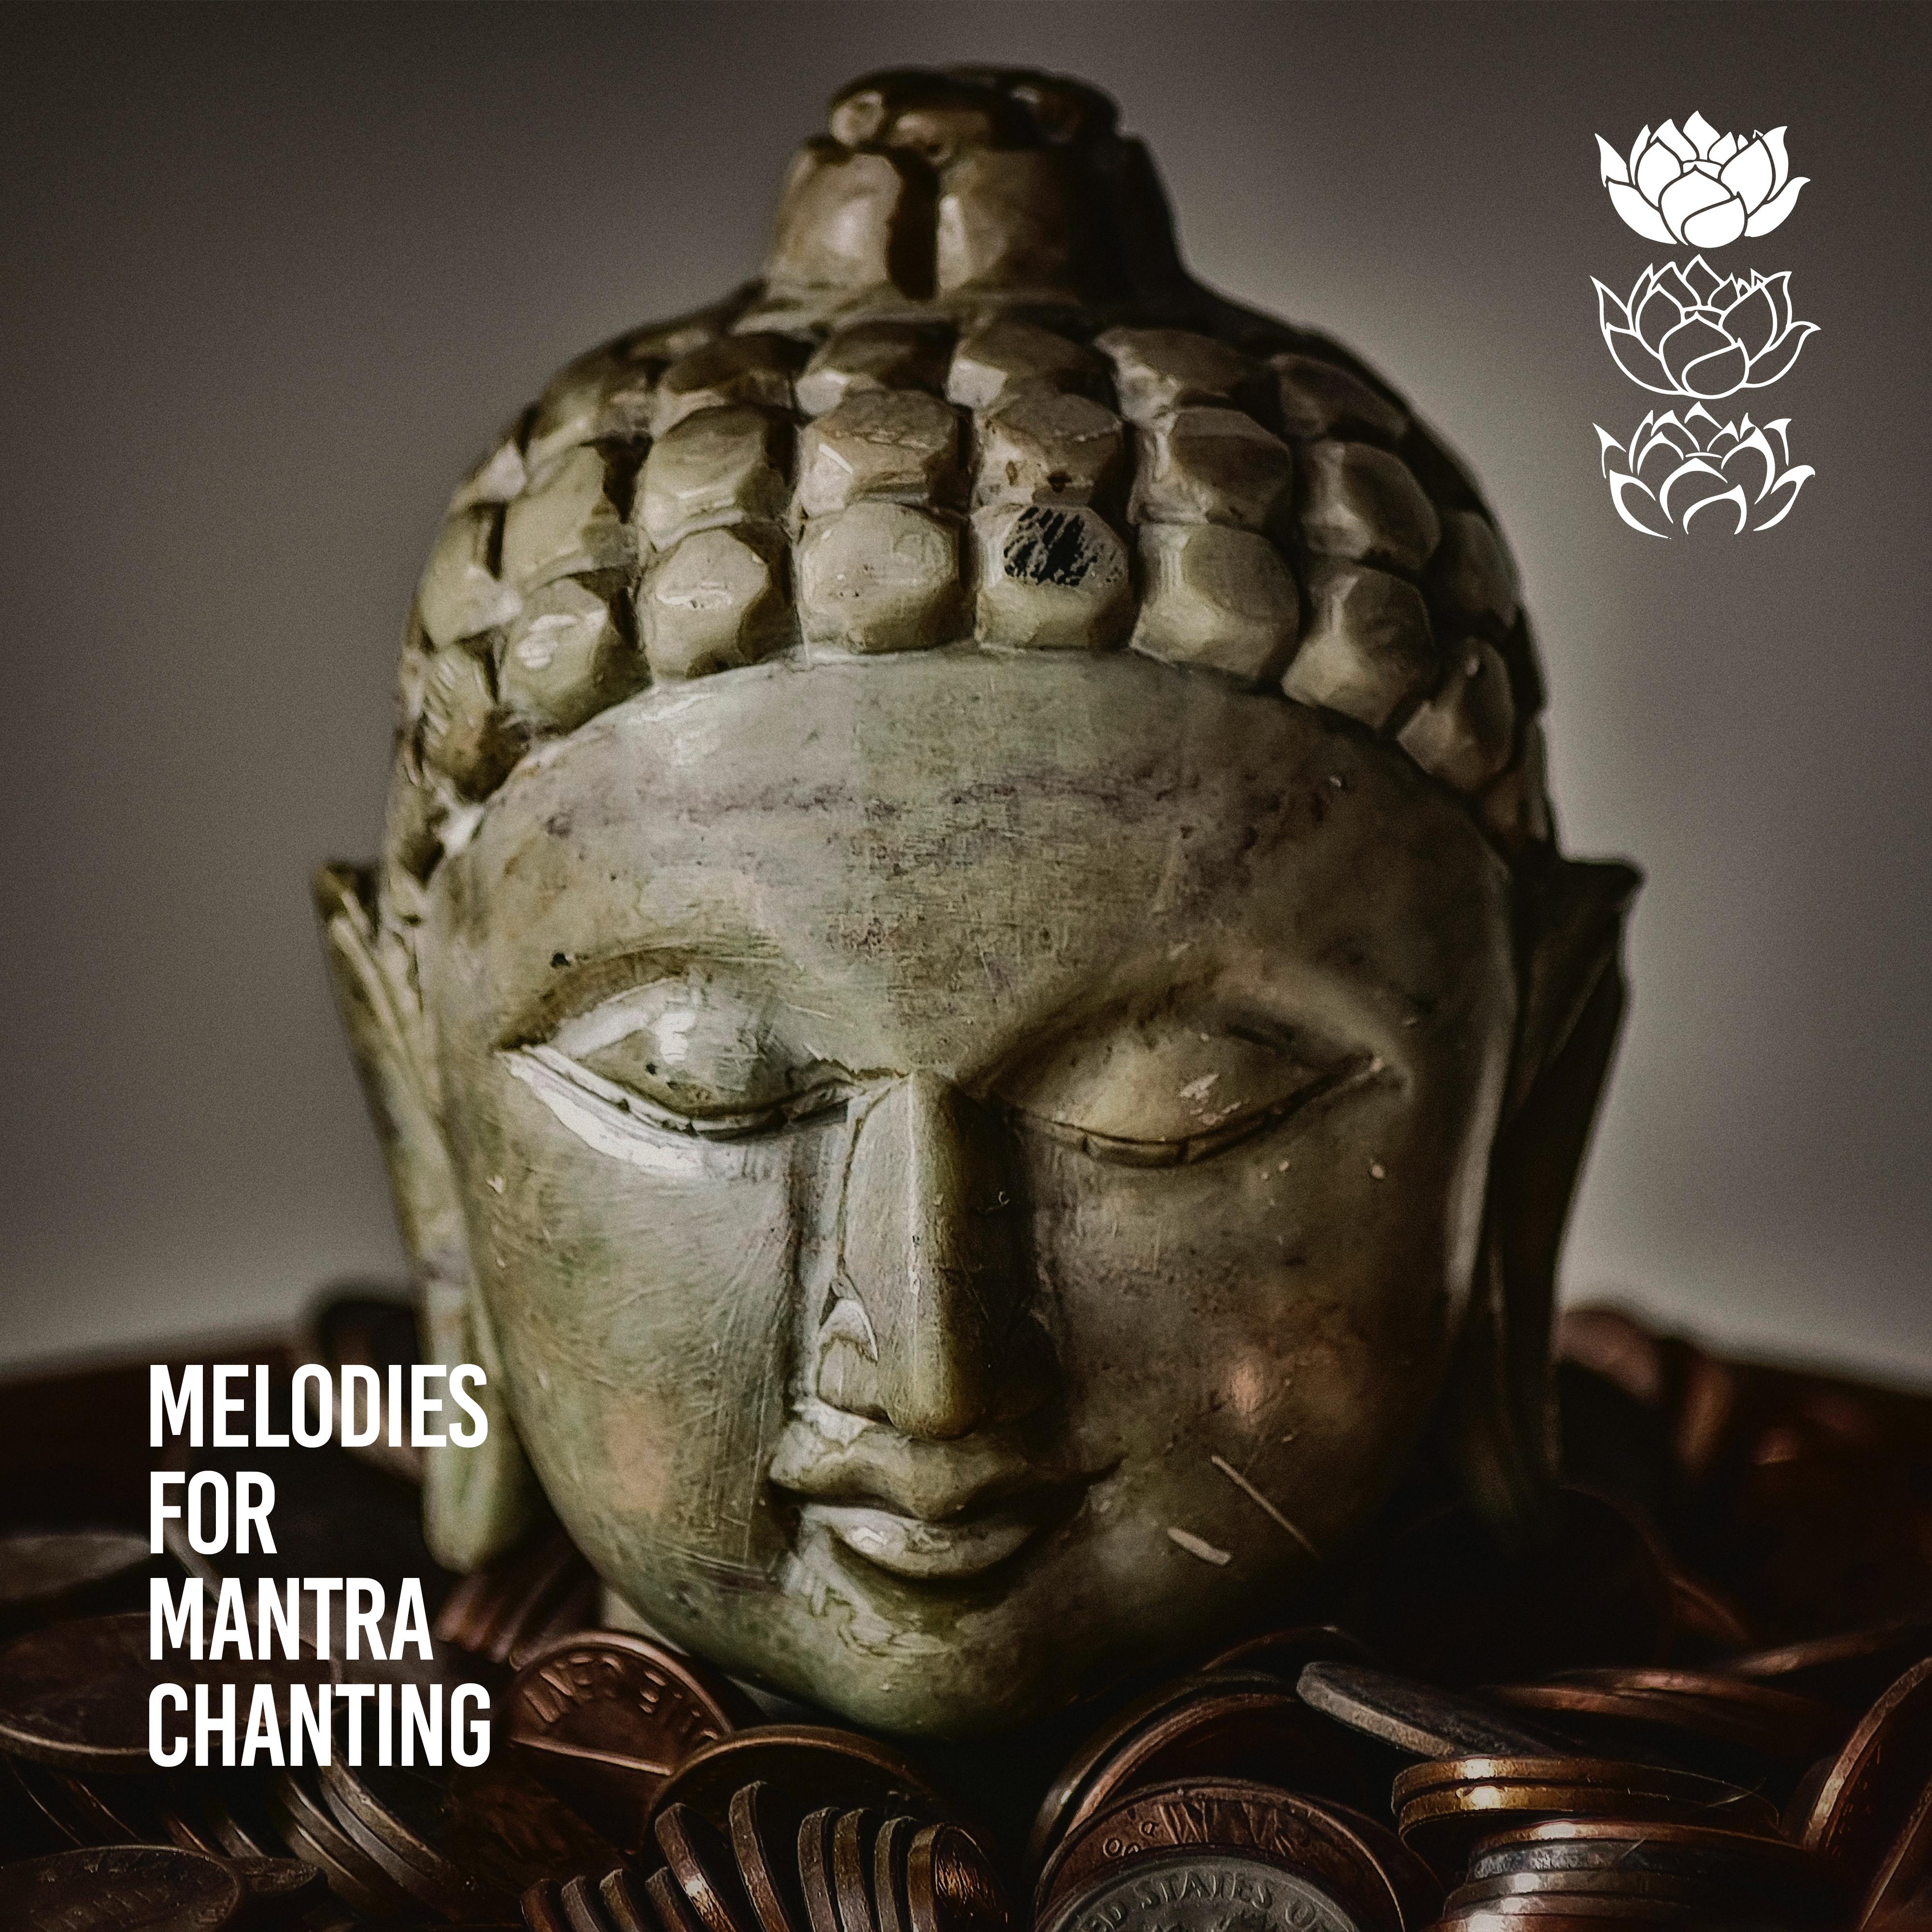 Melodies for Mantra Chanting